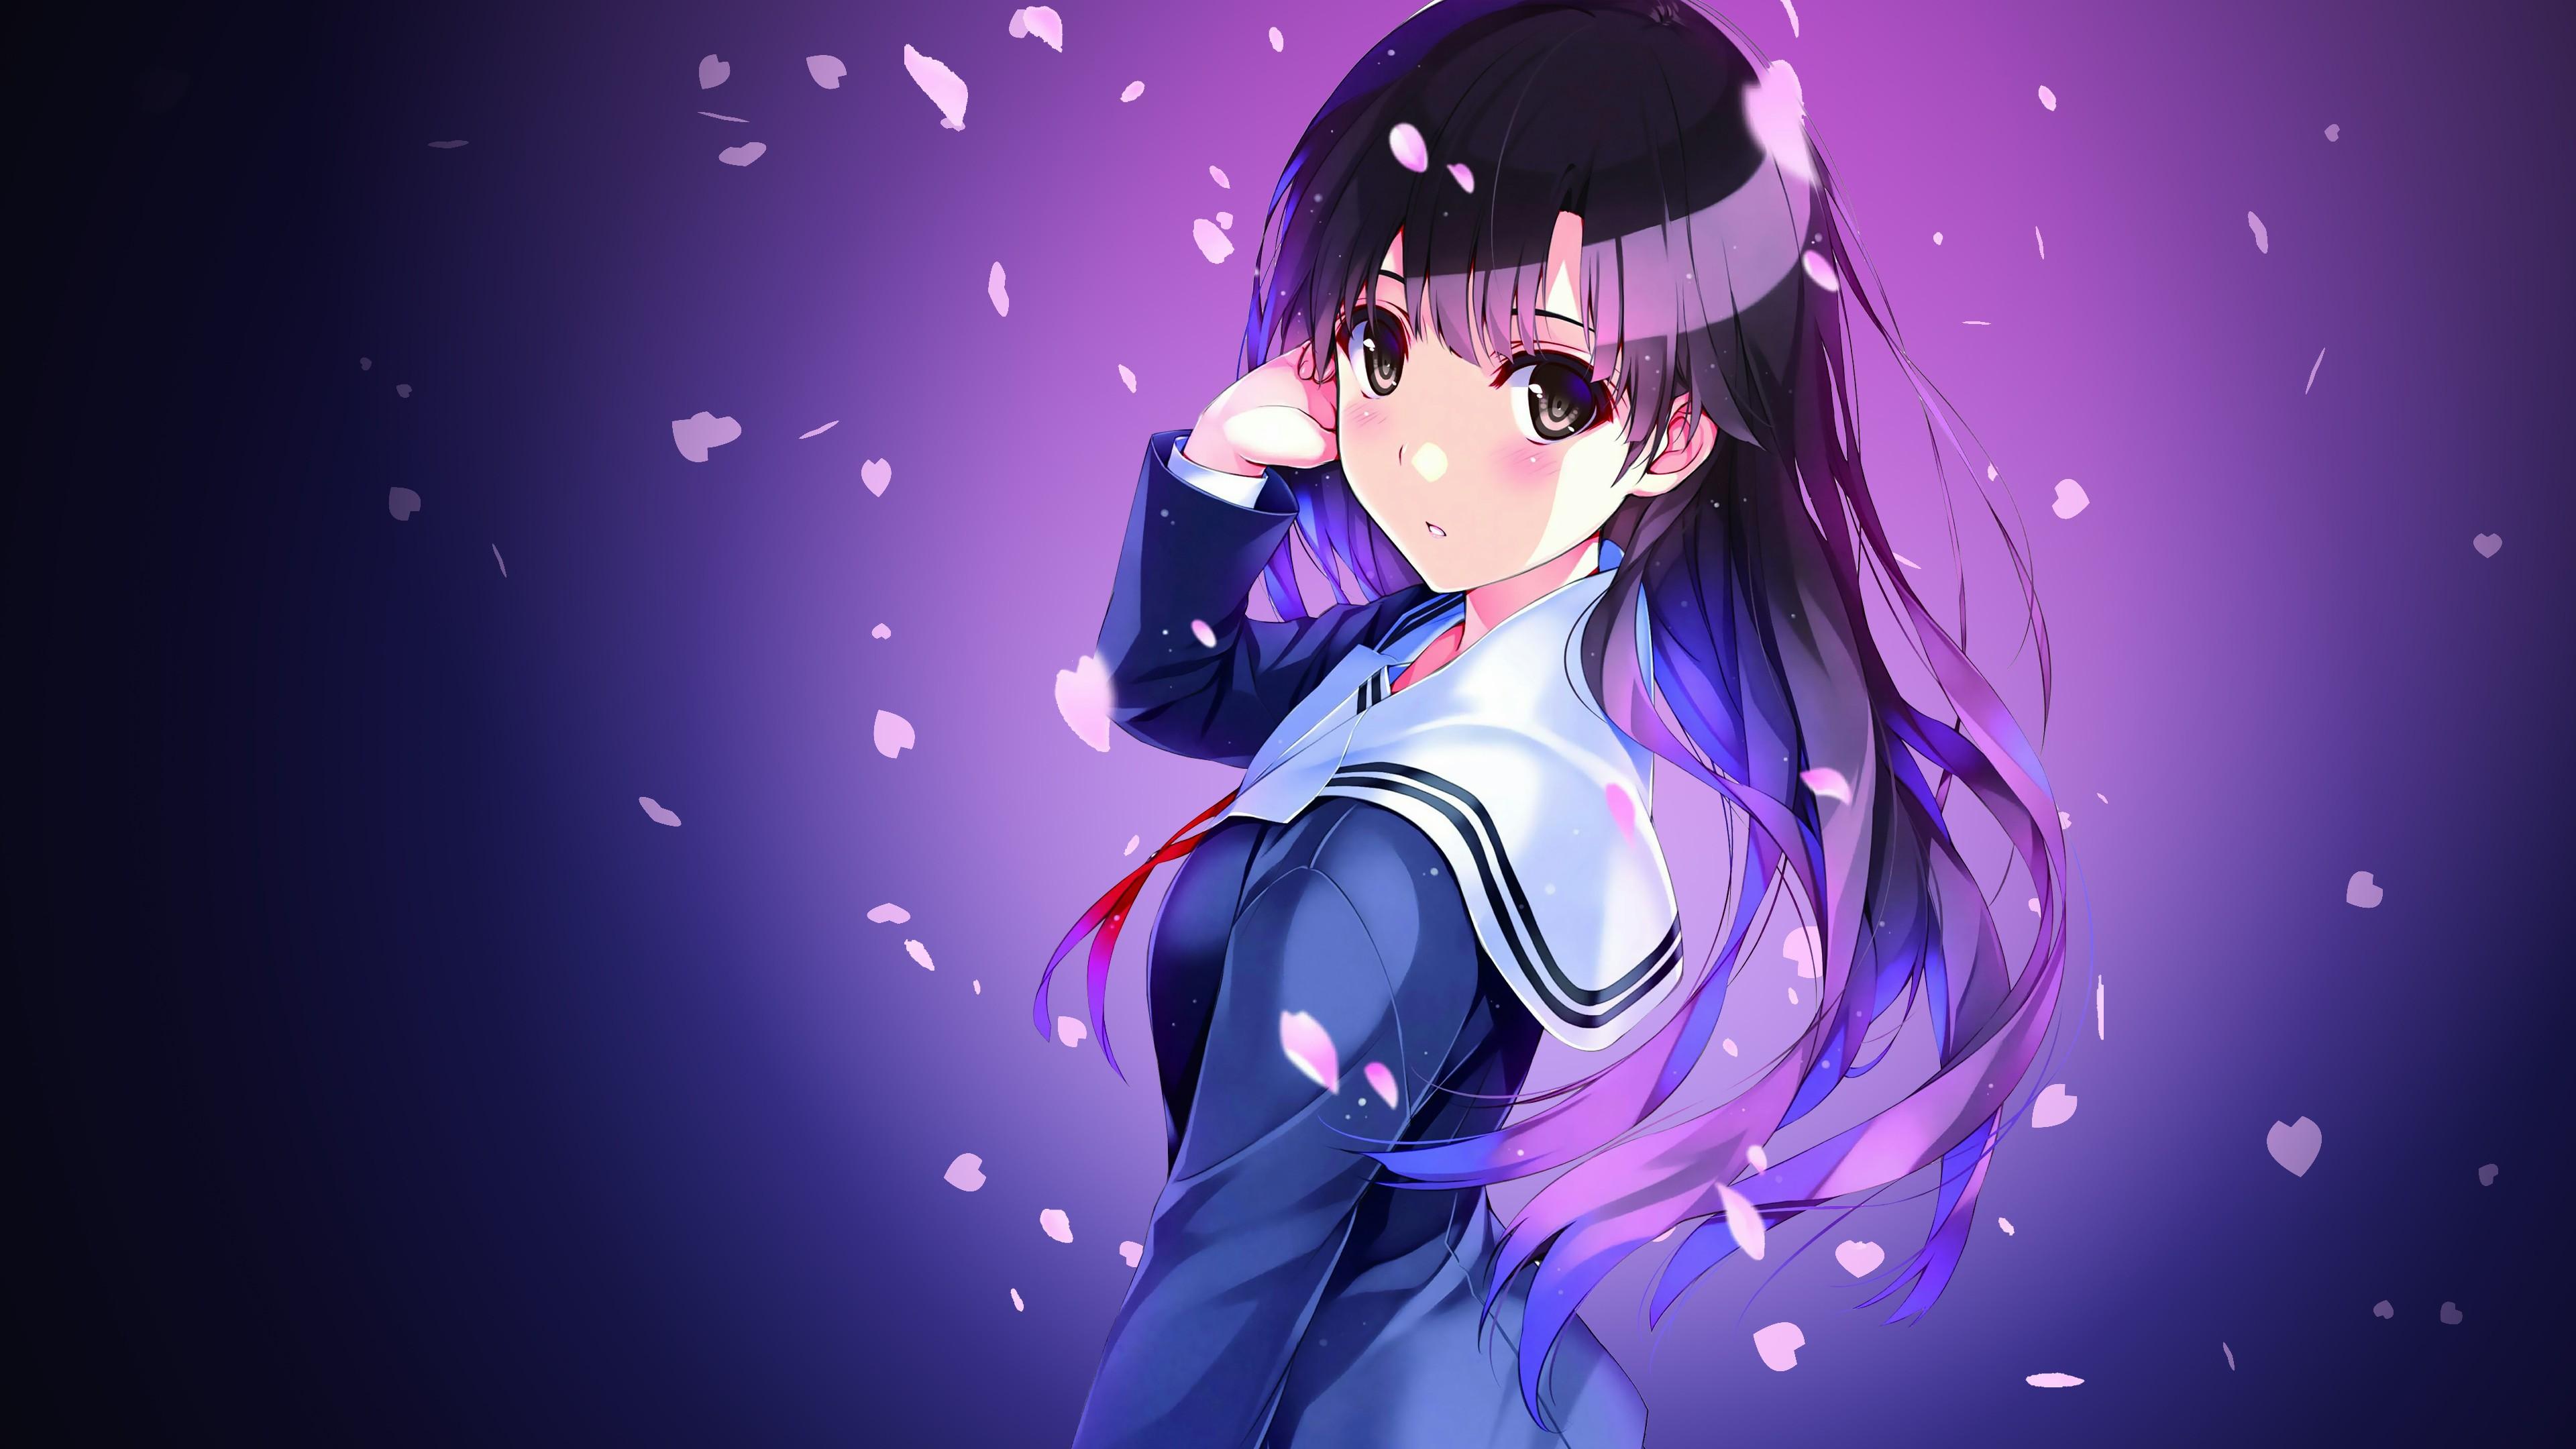 3840 x 2160 · jpeg - Anime Girls wallpaper 1 Download free beautiful backgrounds for ...